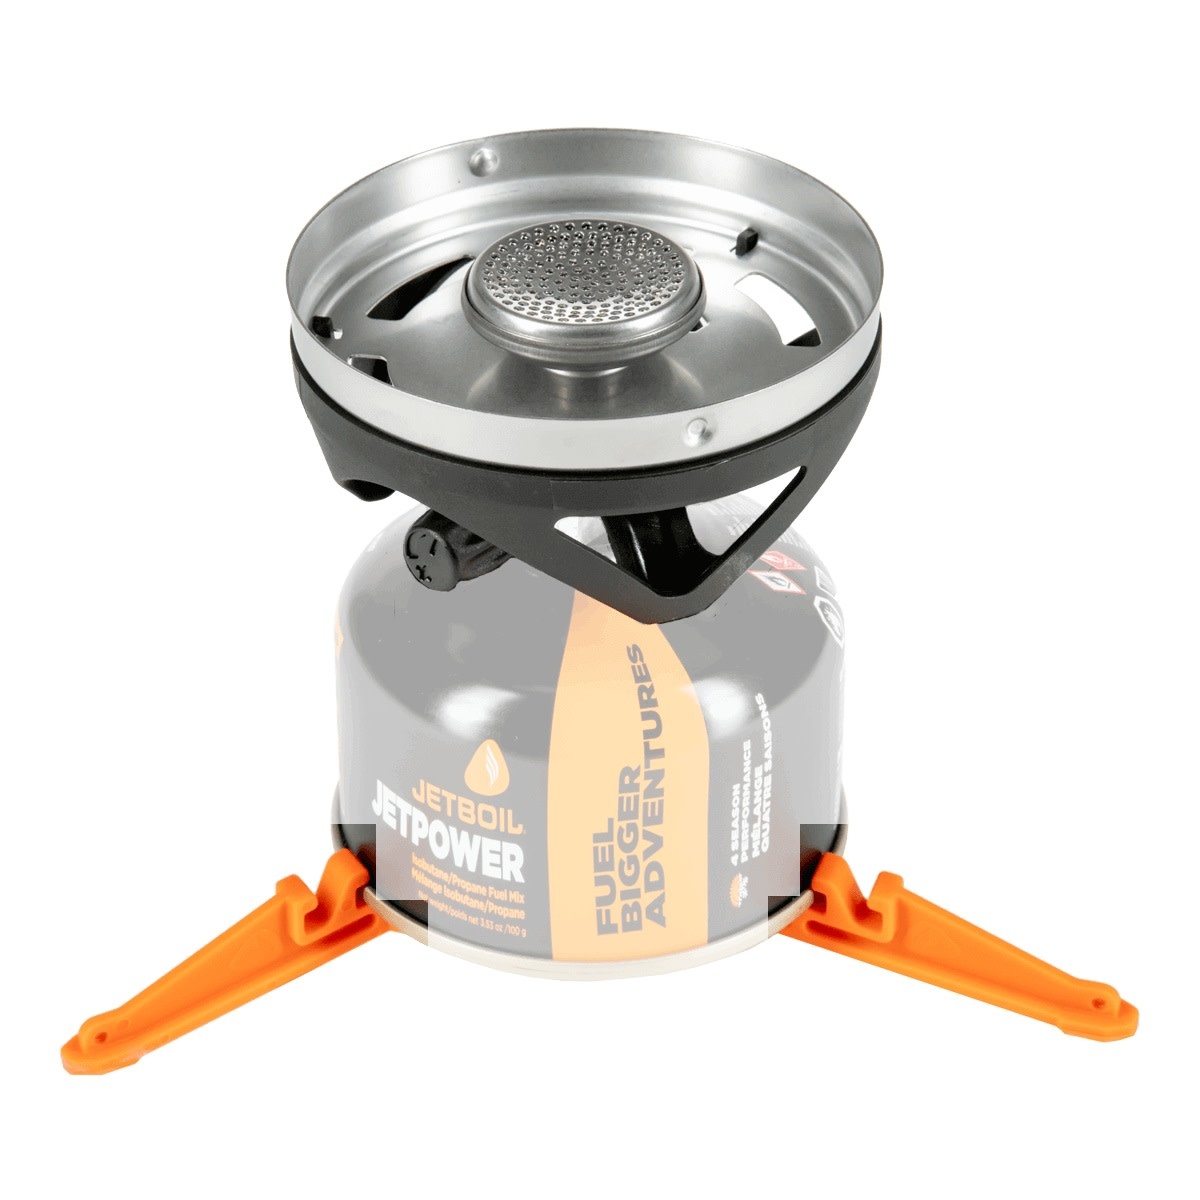 Jetboil Zip PCS Carbon | The BackCountry in Truckee, CA - The 